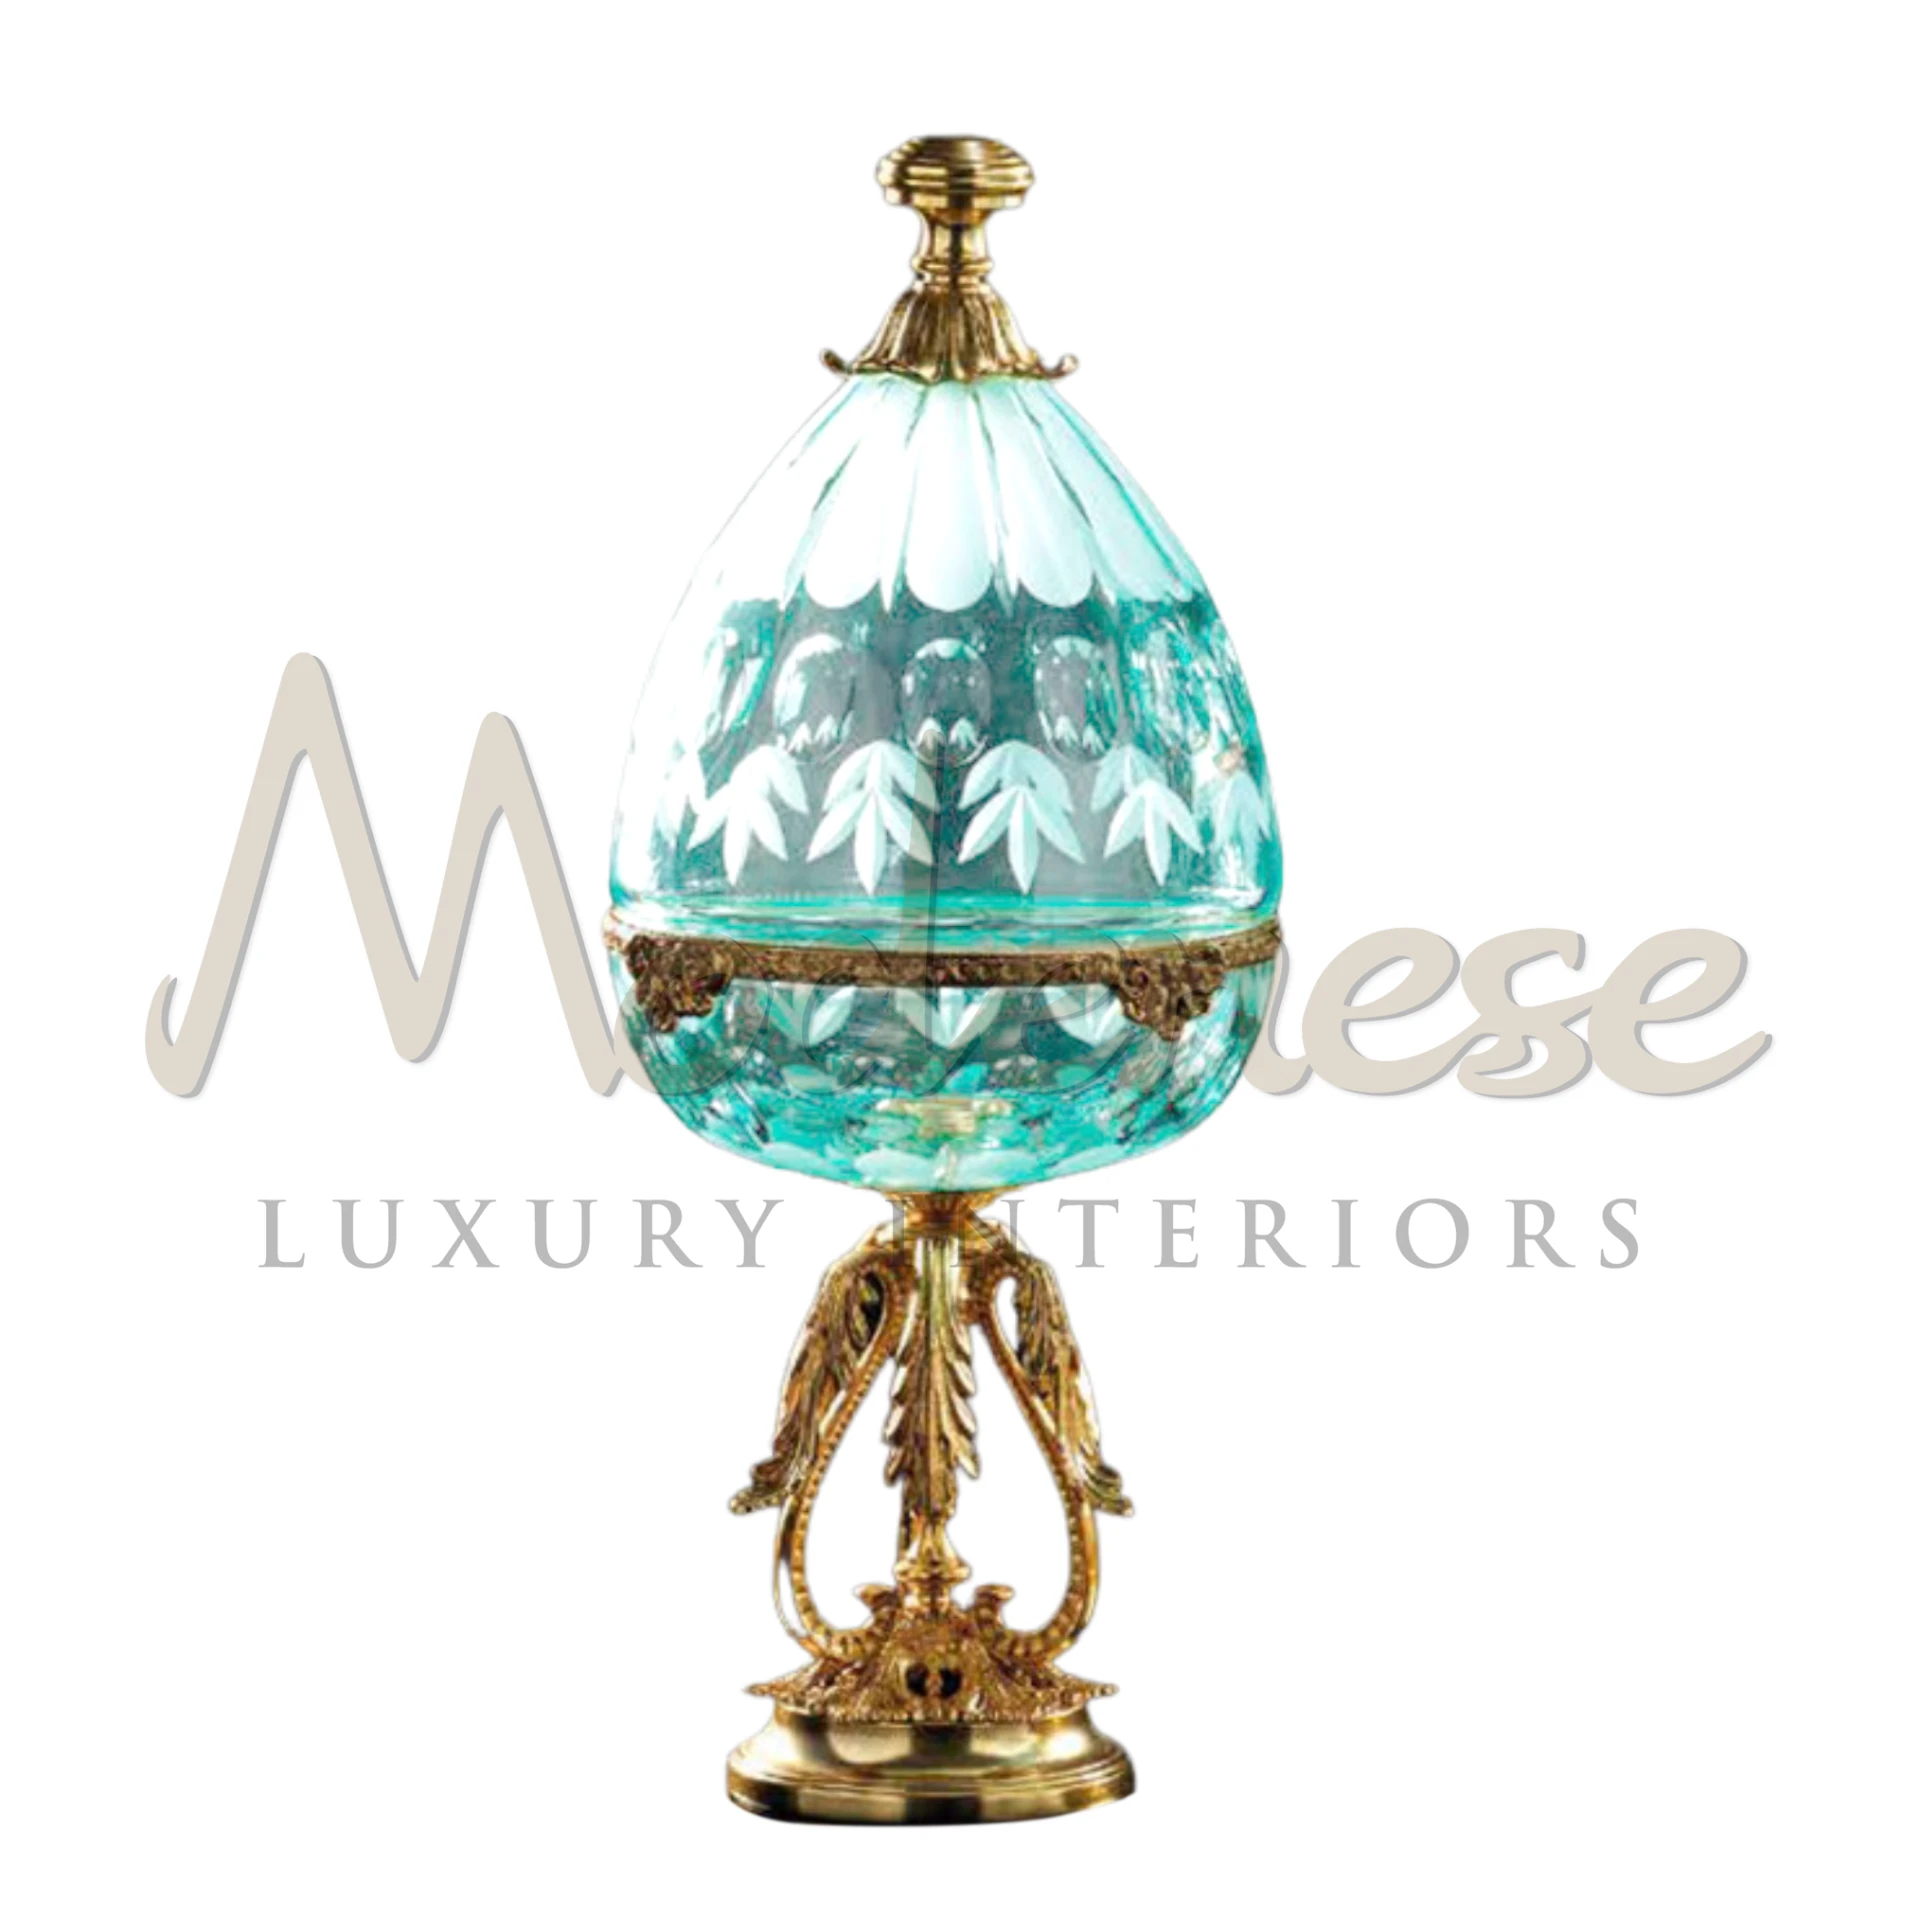 Royal Turquoise Box in fine porcelain, glass, or crystal, adorned with intricate details, epitomizes elegance and luxury in classic or baroque interior design styles.






